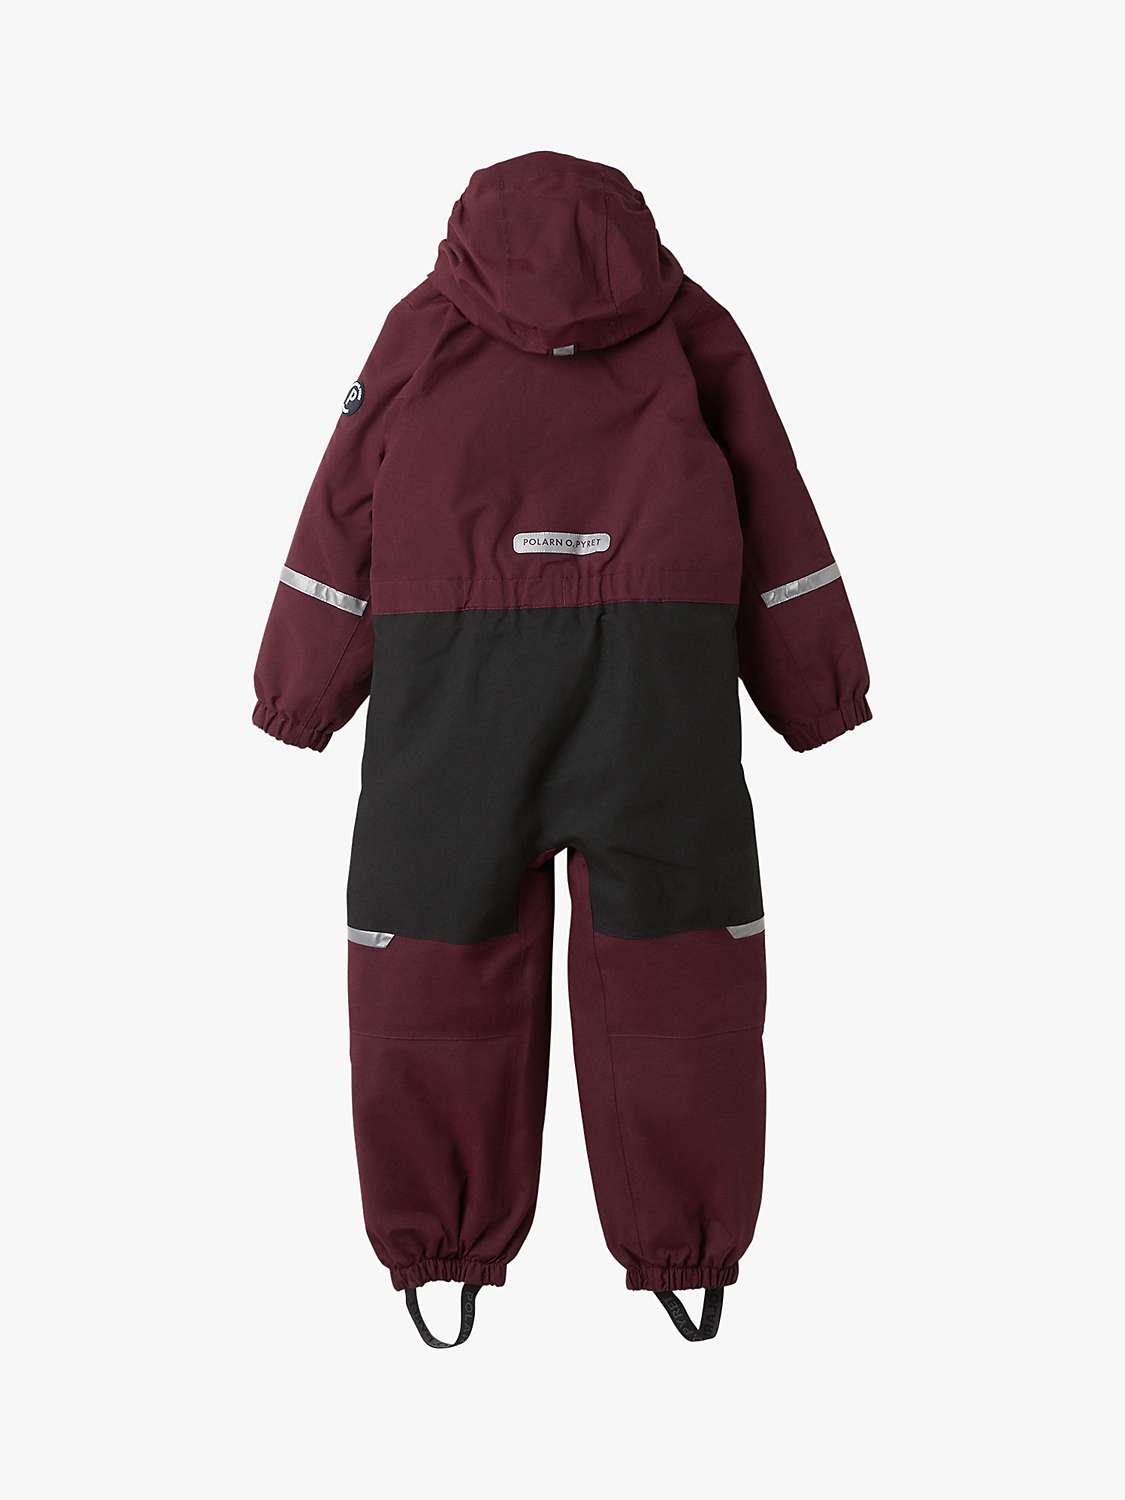 Buy Polarn O. Pyret Kids' Waterproof Lined Overall, Red Online at johnlewis.com